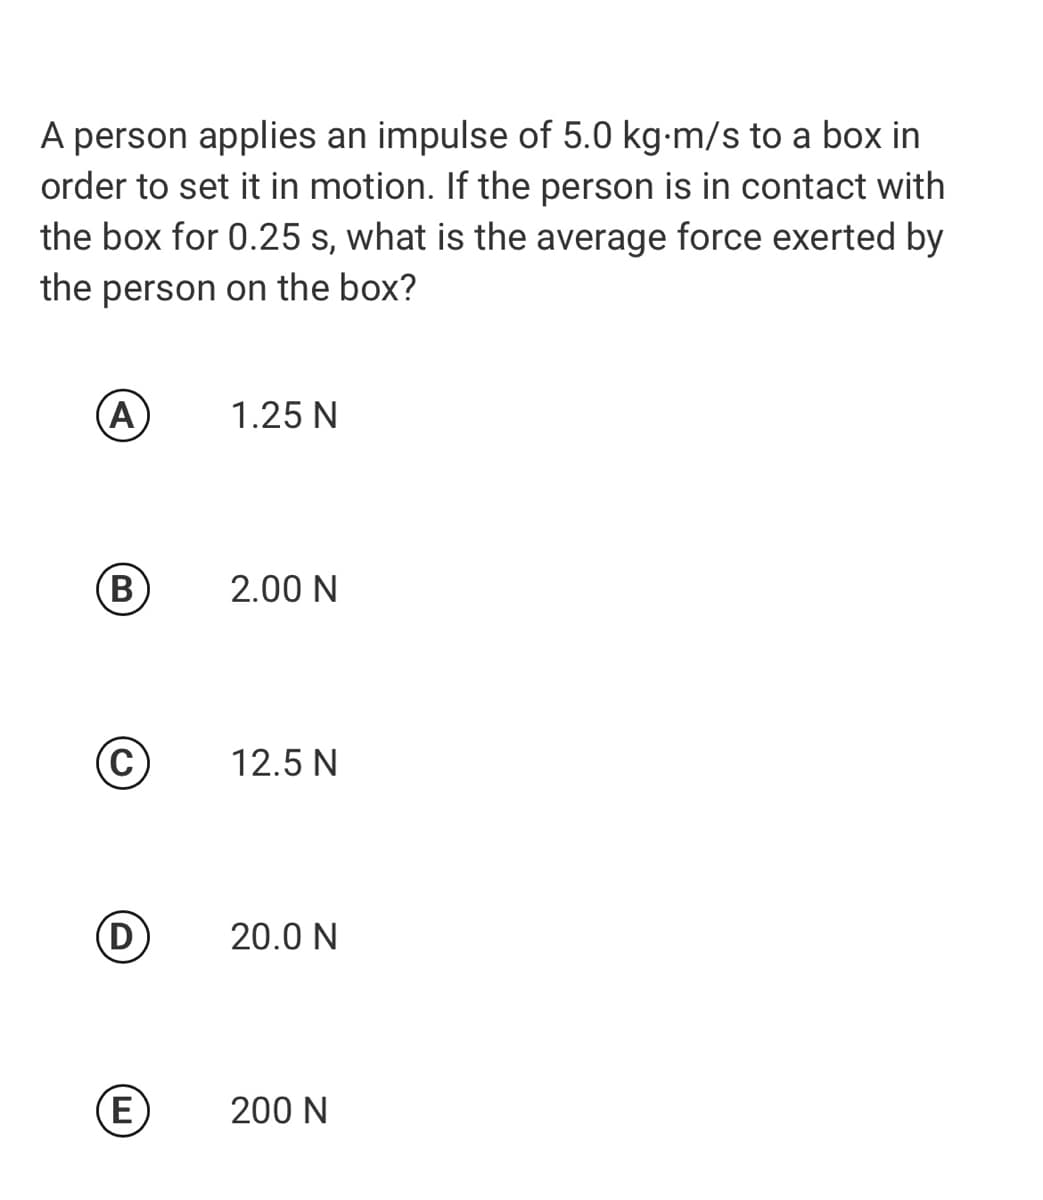 A person applies an impulse of 5.0 kg-m/s to a box in
order to set it in motion. If the person is in contact with
the box for 0.25 s, what is the average force exerted by
the person on the box?
(A
1.25 N
(B
2.00 N
12.5 N
D
20.0 N
(E
200 N
